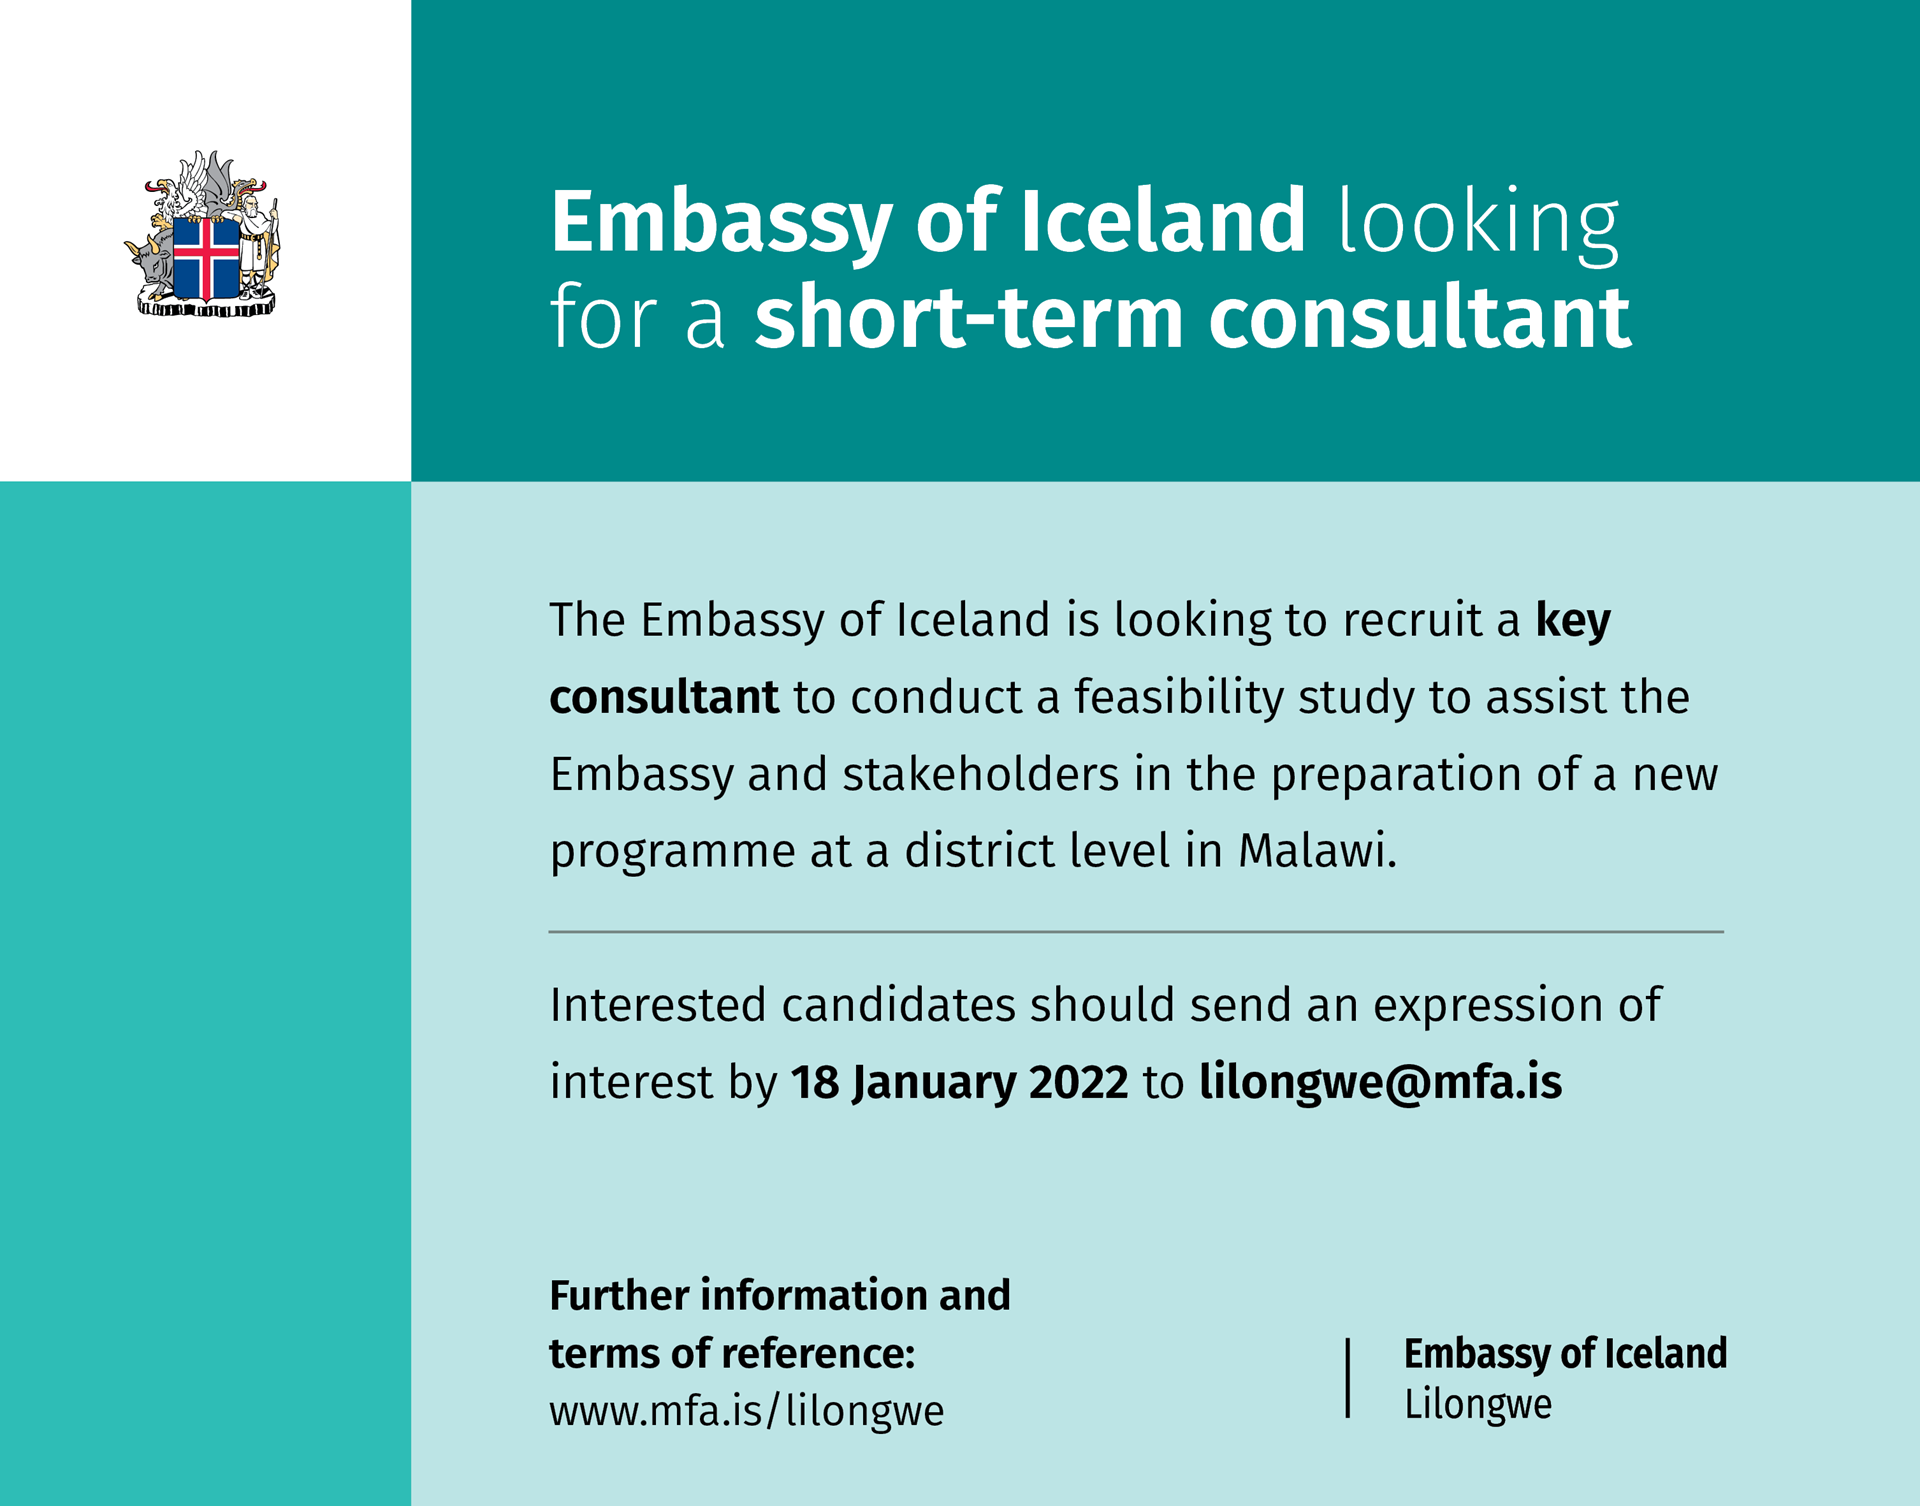 Embassy of Iceland looking for a short-term consultant - mynd